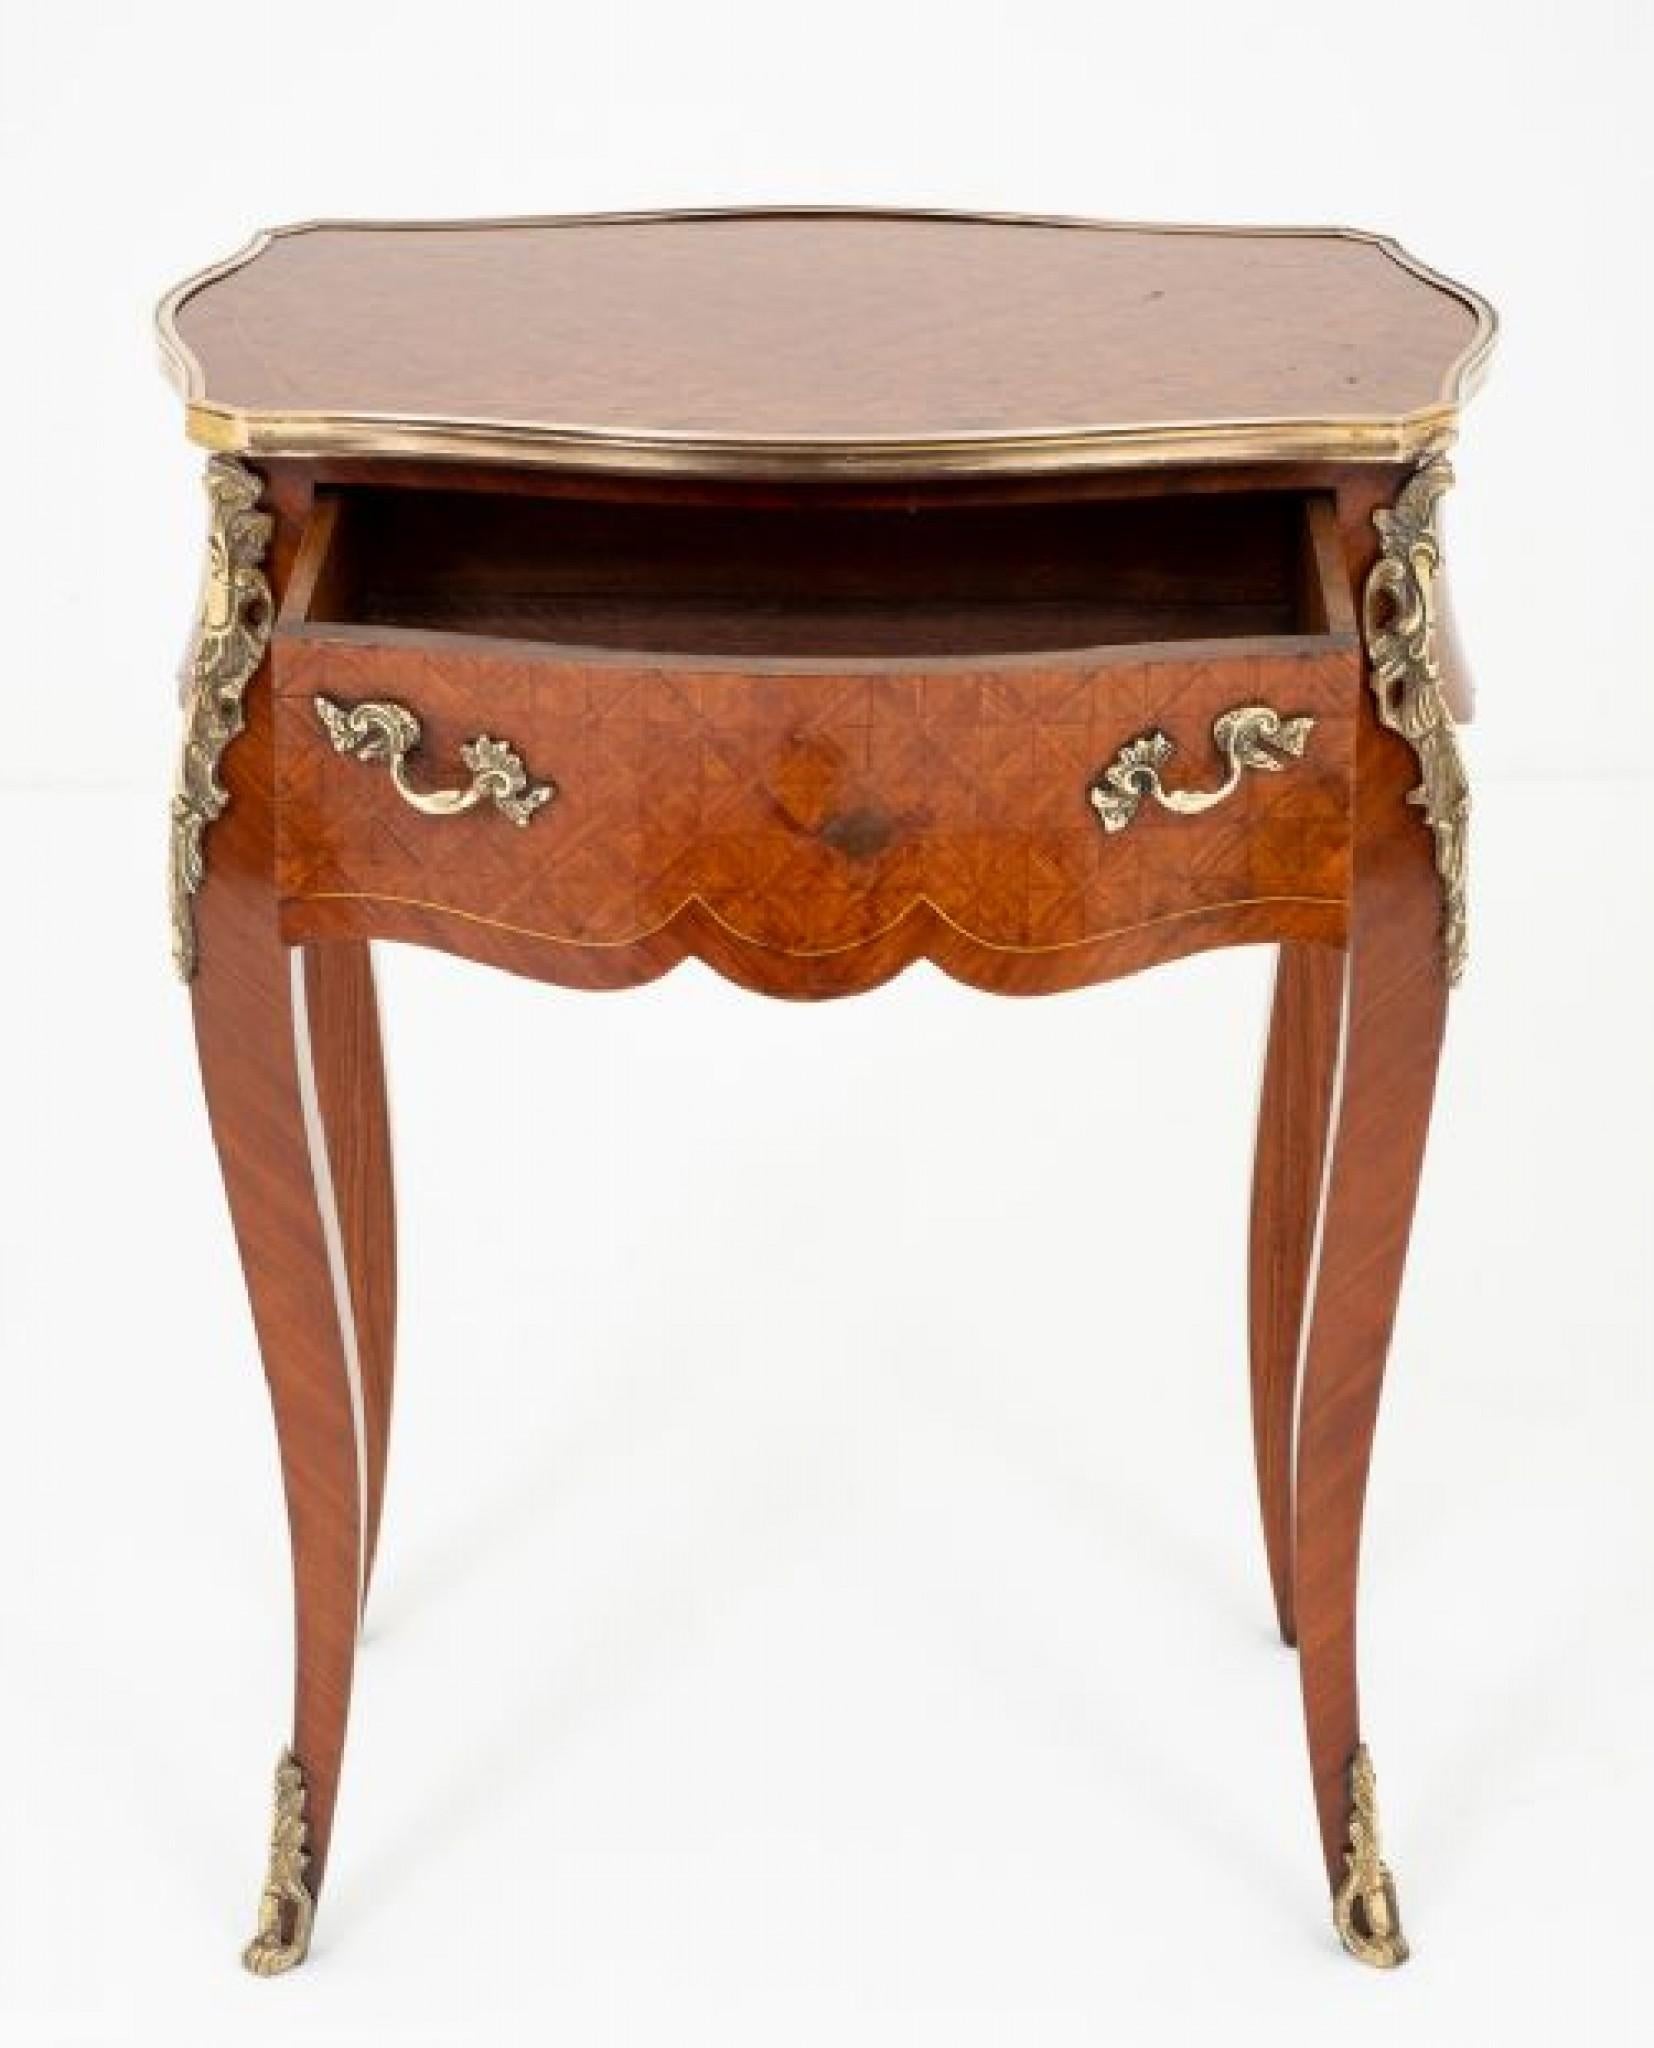 Early 20th Century French Empire Parquetry Side Table